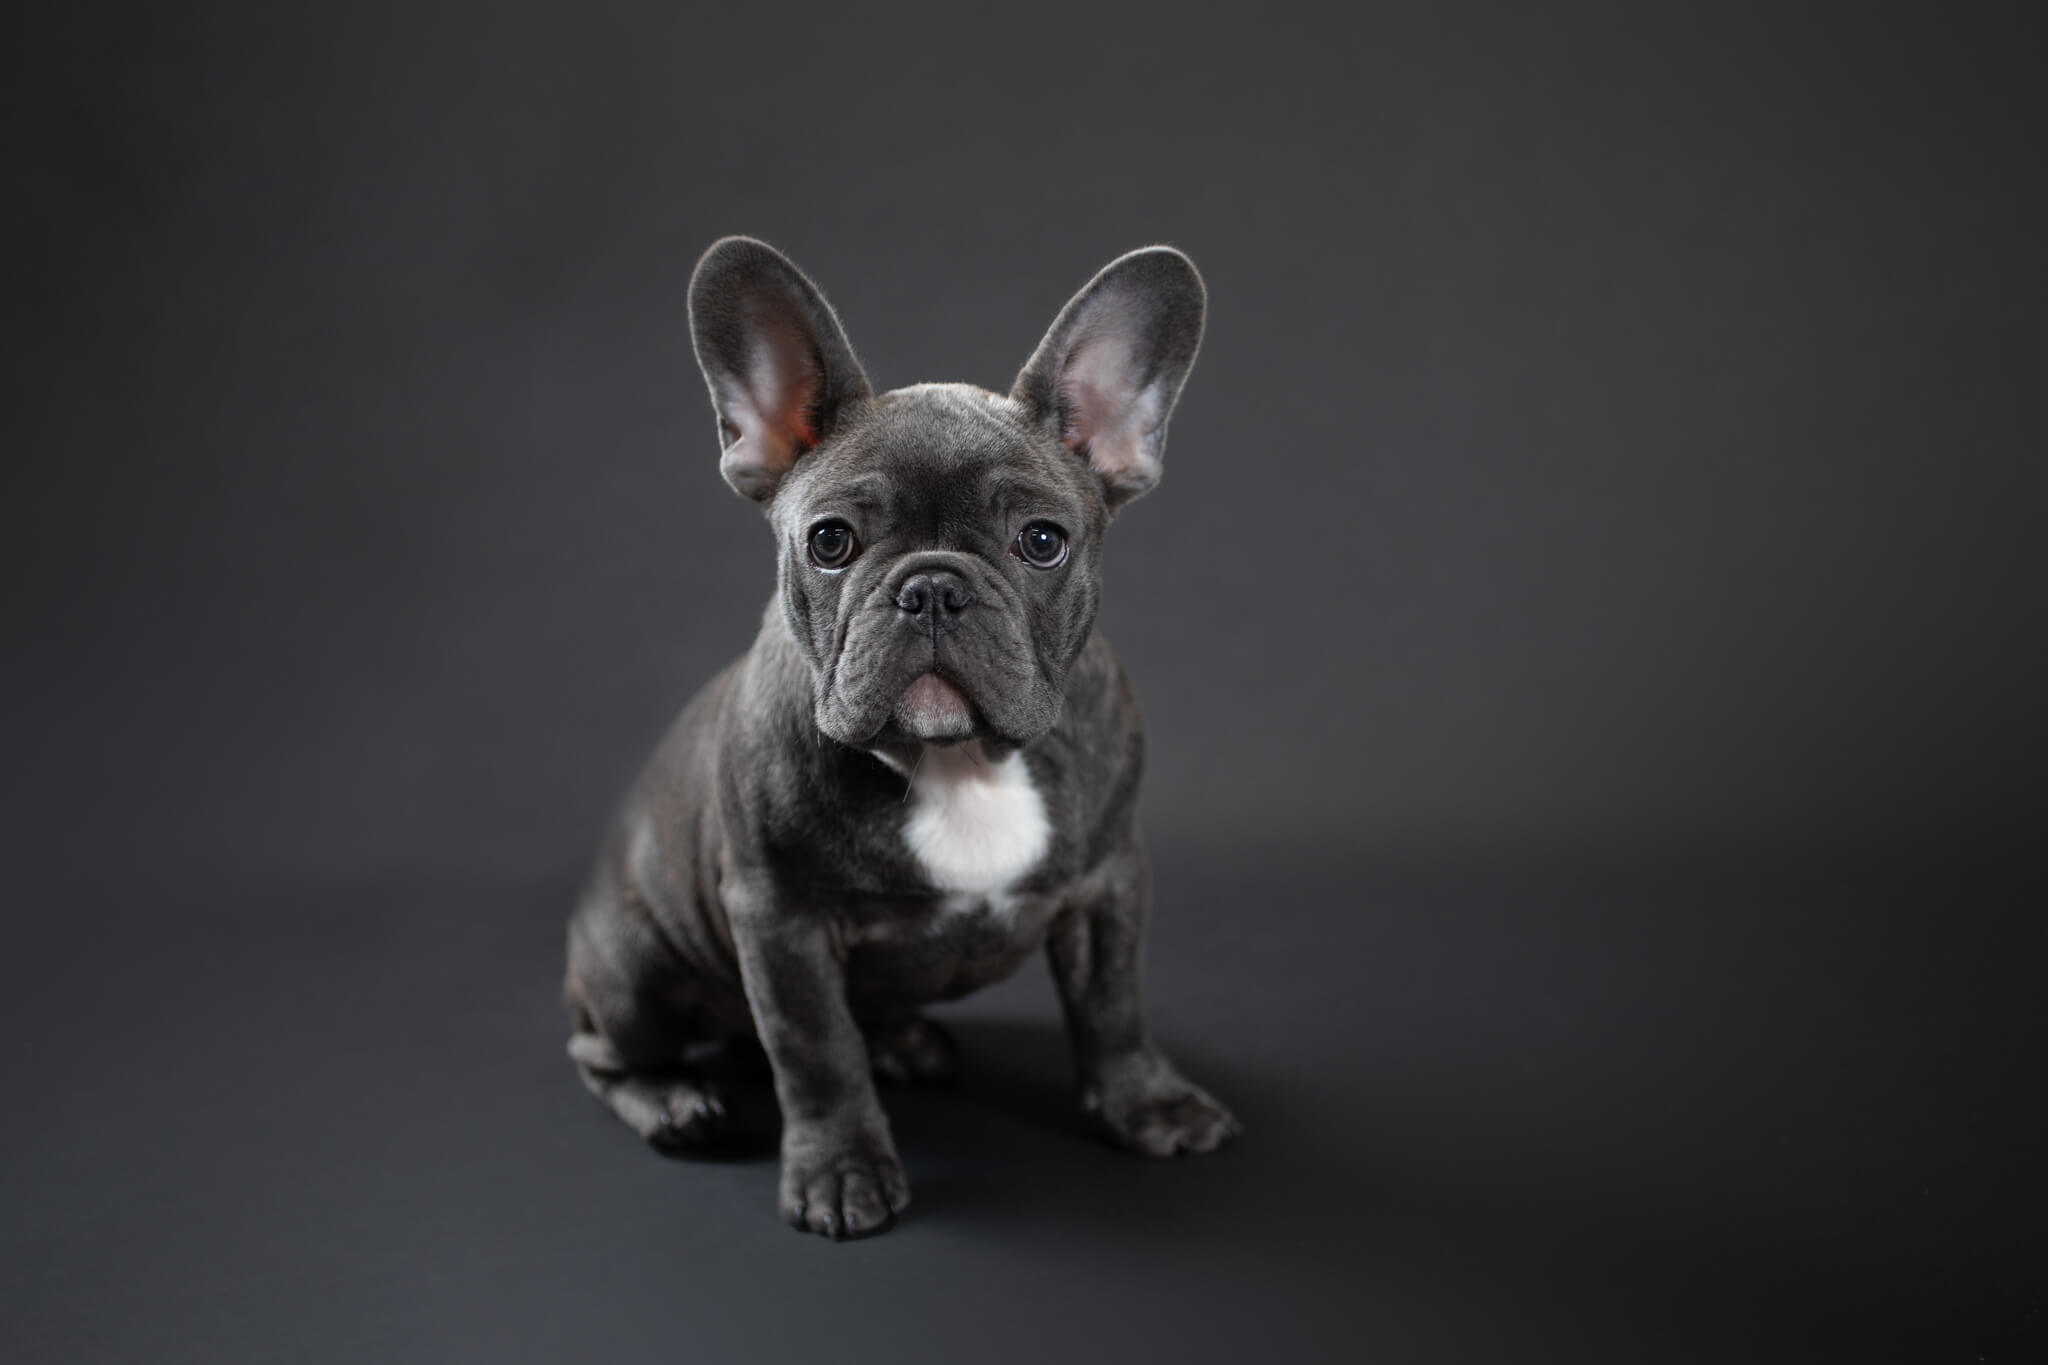 grey french bulldog puppy sits with ears up in a studio adopt a dog Massachusetts